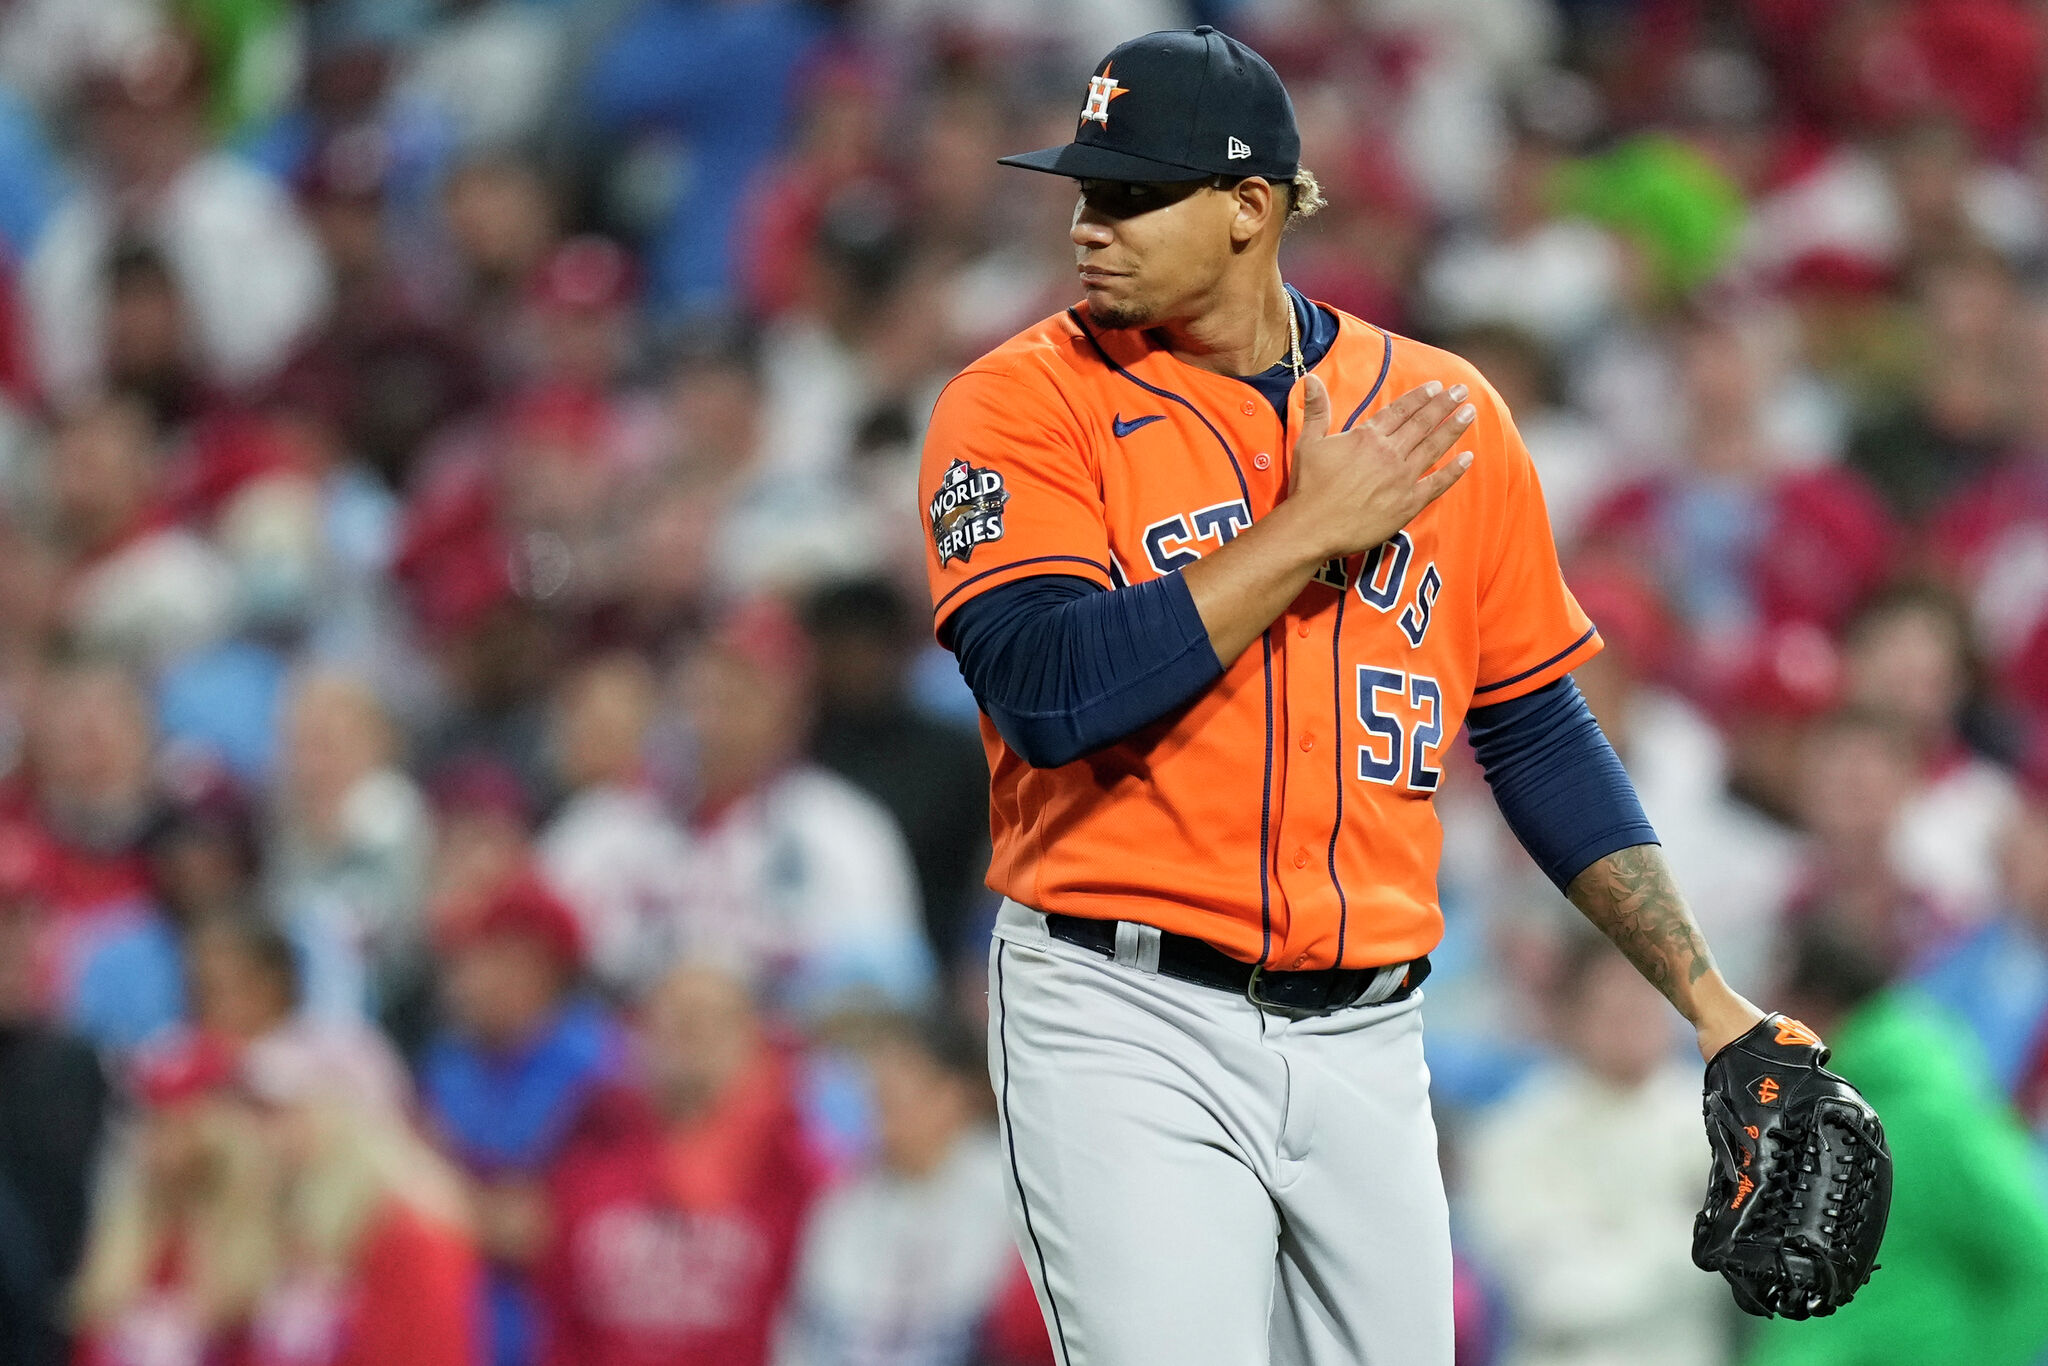 In a season of standout performances in the Astros bullpen, Bryan